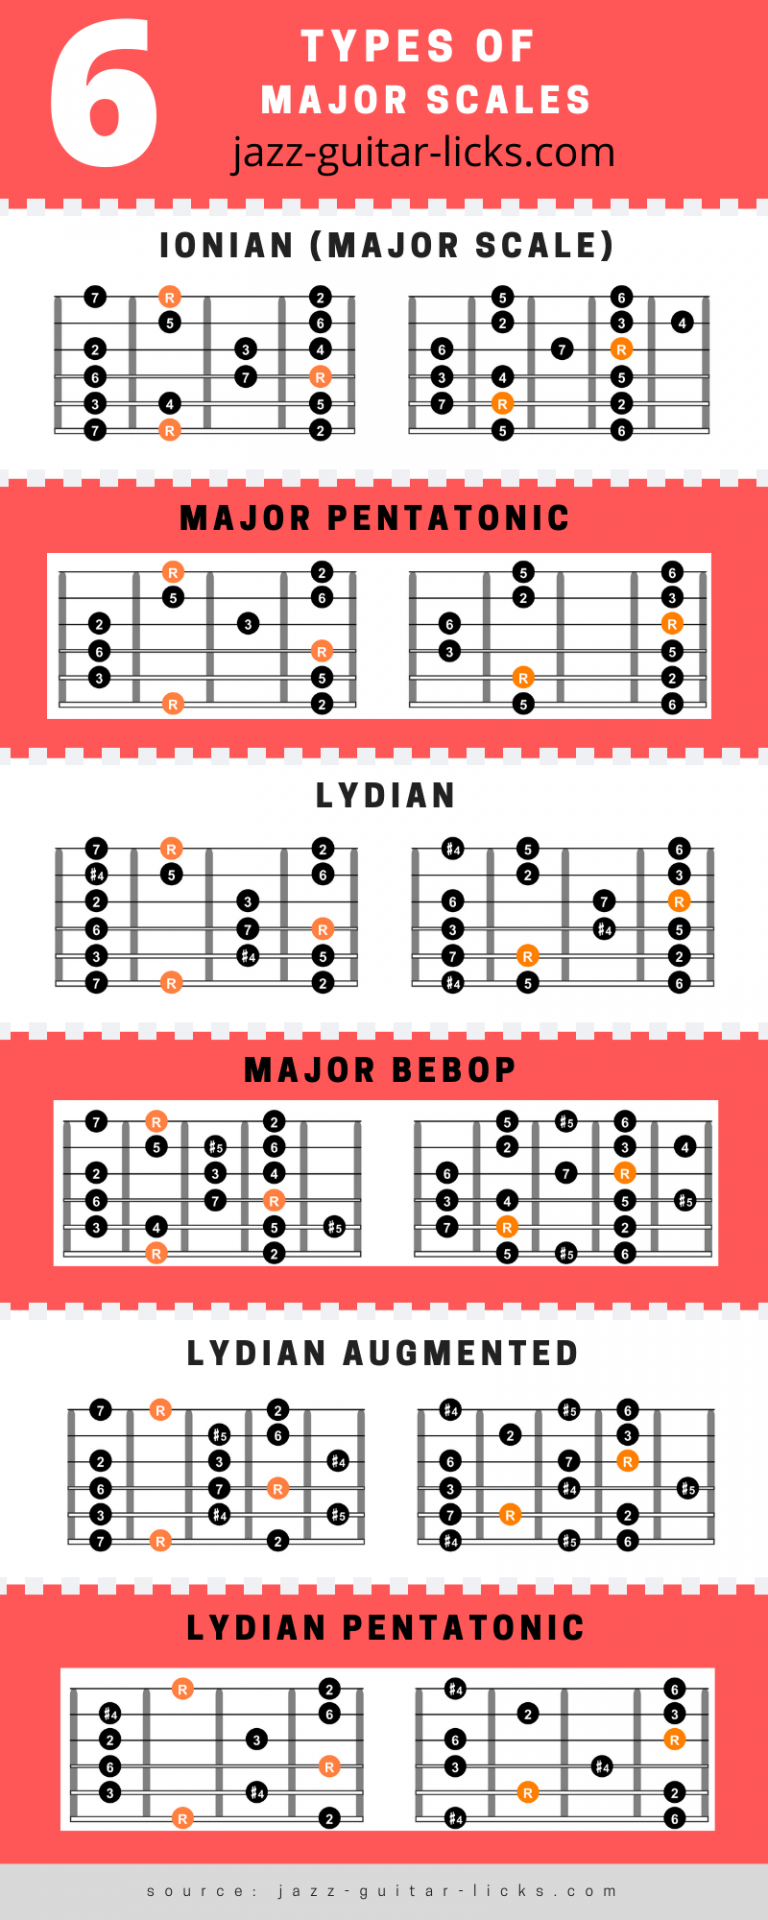 6 Types of Major Scales Guitar Chart With Diagrams